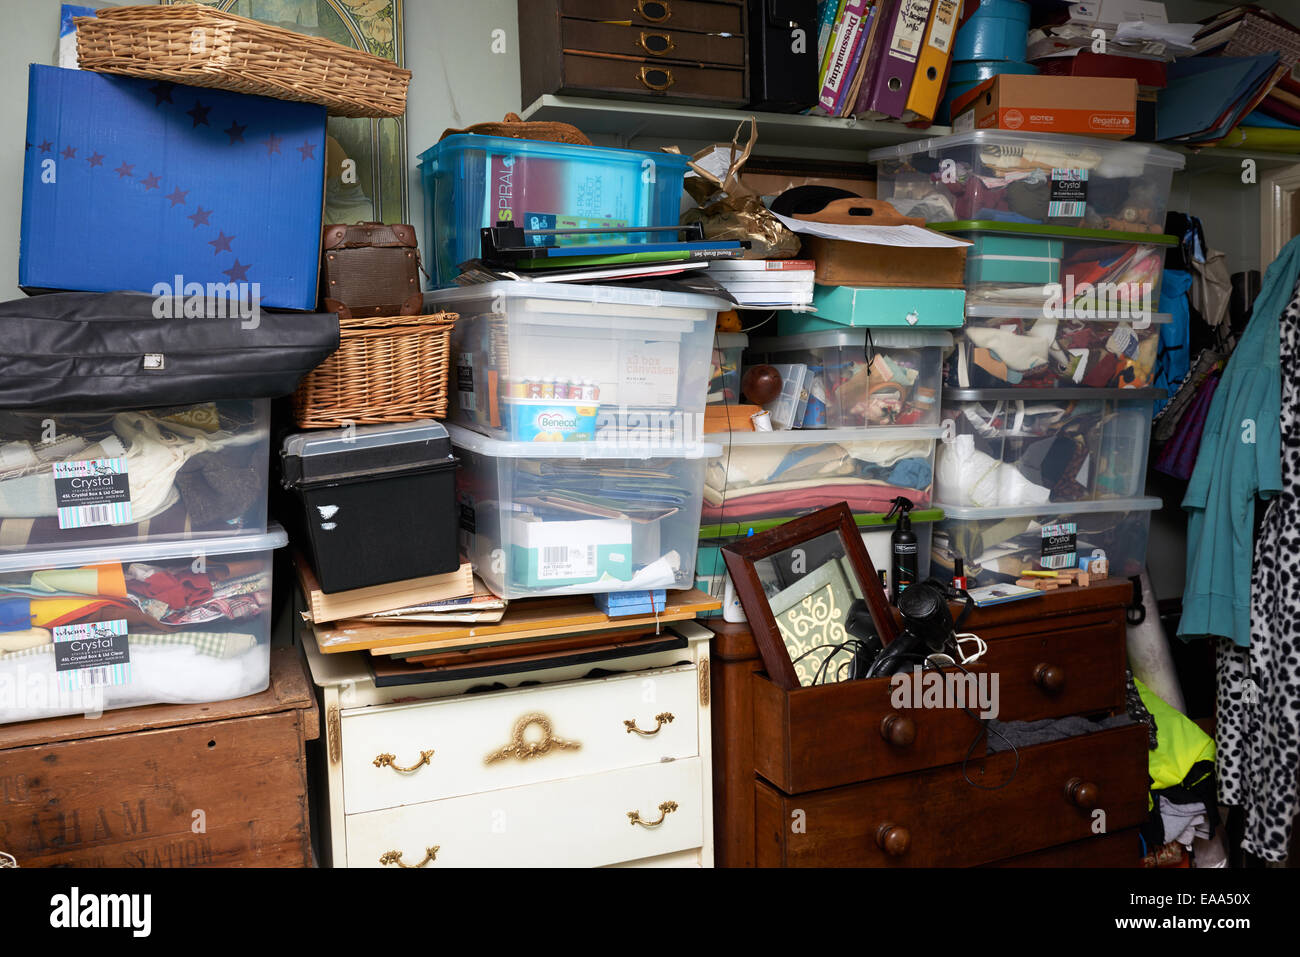 Bedroom filled with clutter Stock Photo - Alamy